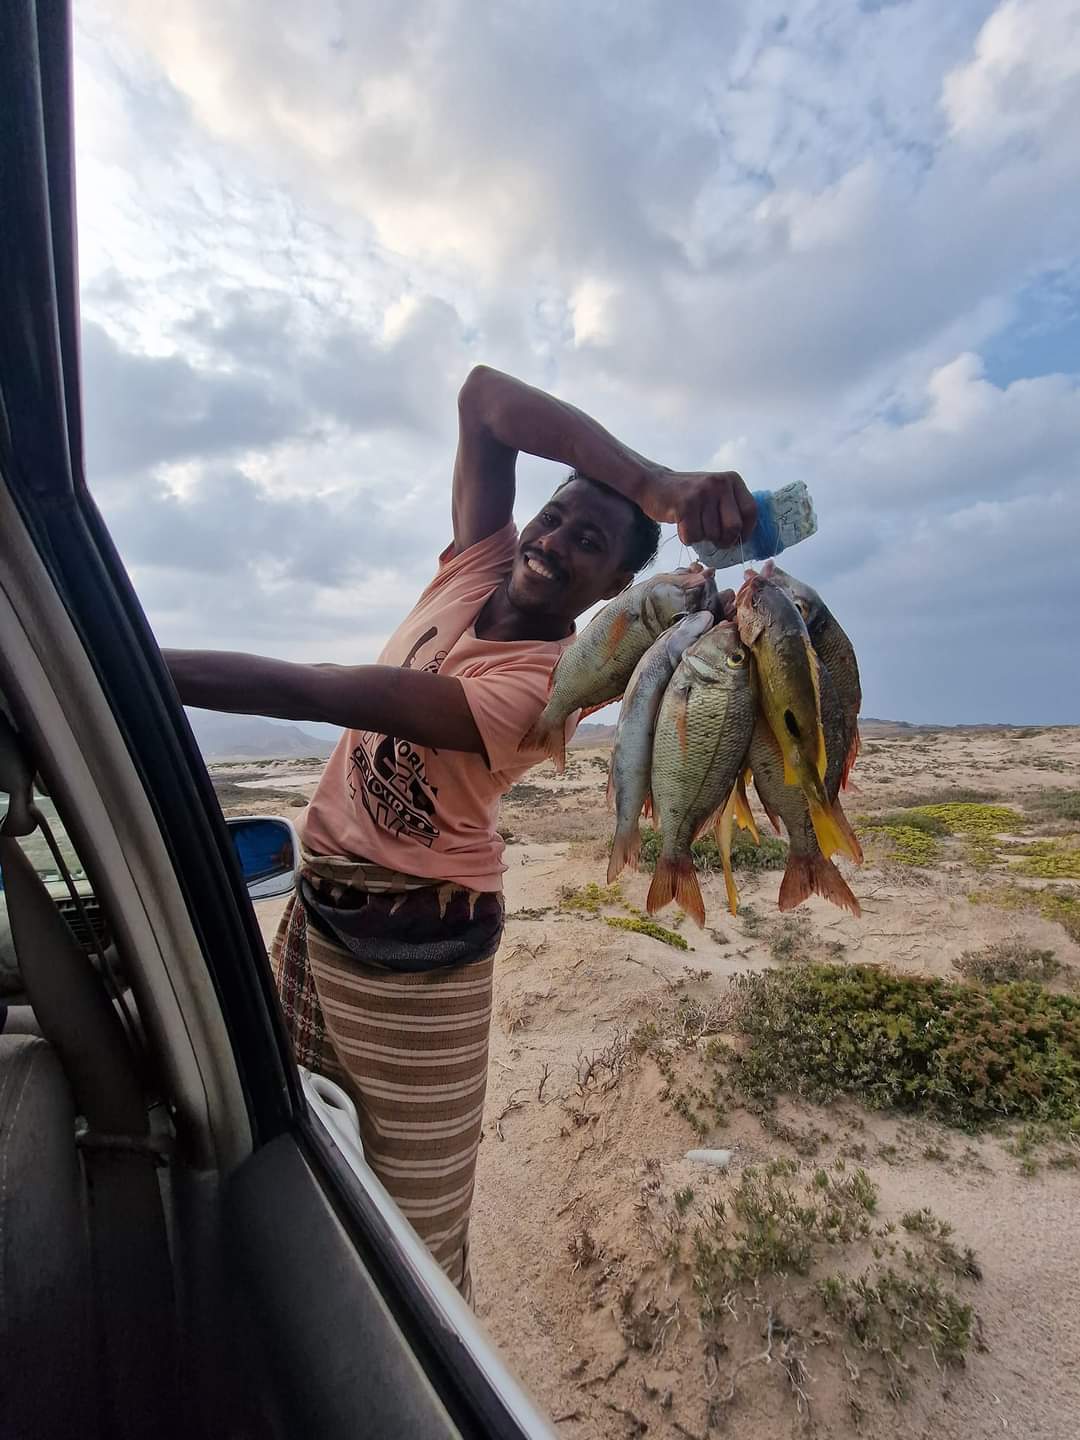 A local fisherman hitching a lift in Socotra